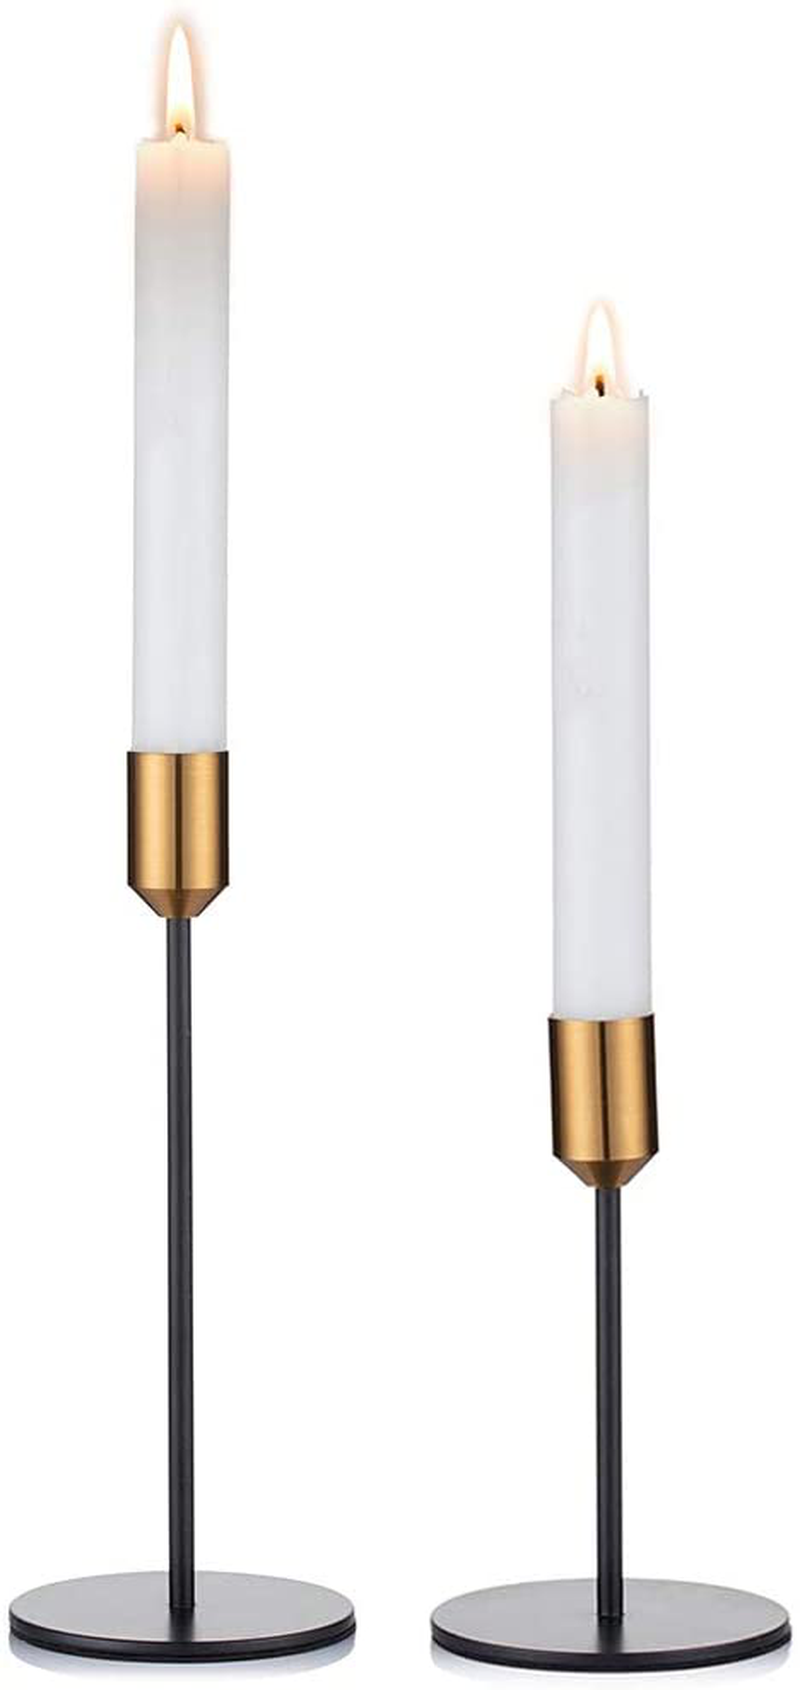 Nuptio Candlestick Holders Taper Candle Holders, 2 Pcs Candle Stick Holders Set, Gold & Black Brass Candlestick Holders Set Table Decorative Modern Candle Holders for Tapered Candles (S + L) Home & Garden > Decor > Home Fragrance Accessories > Candle Holders NUPTIO S + L  